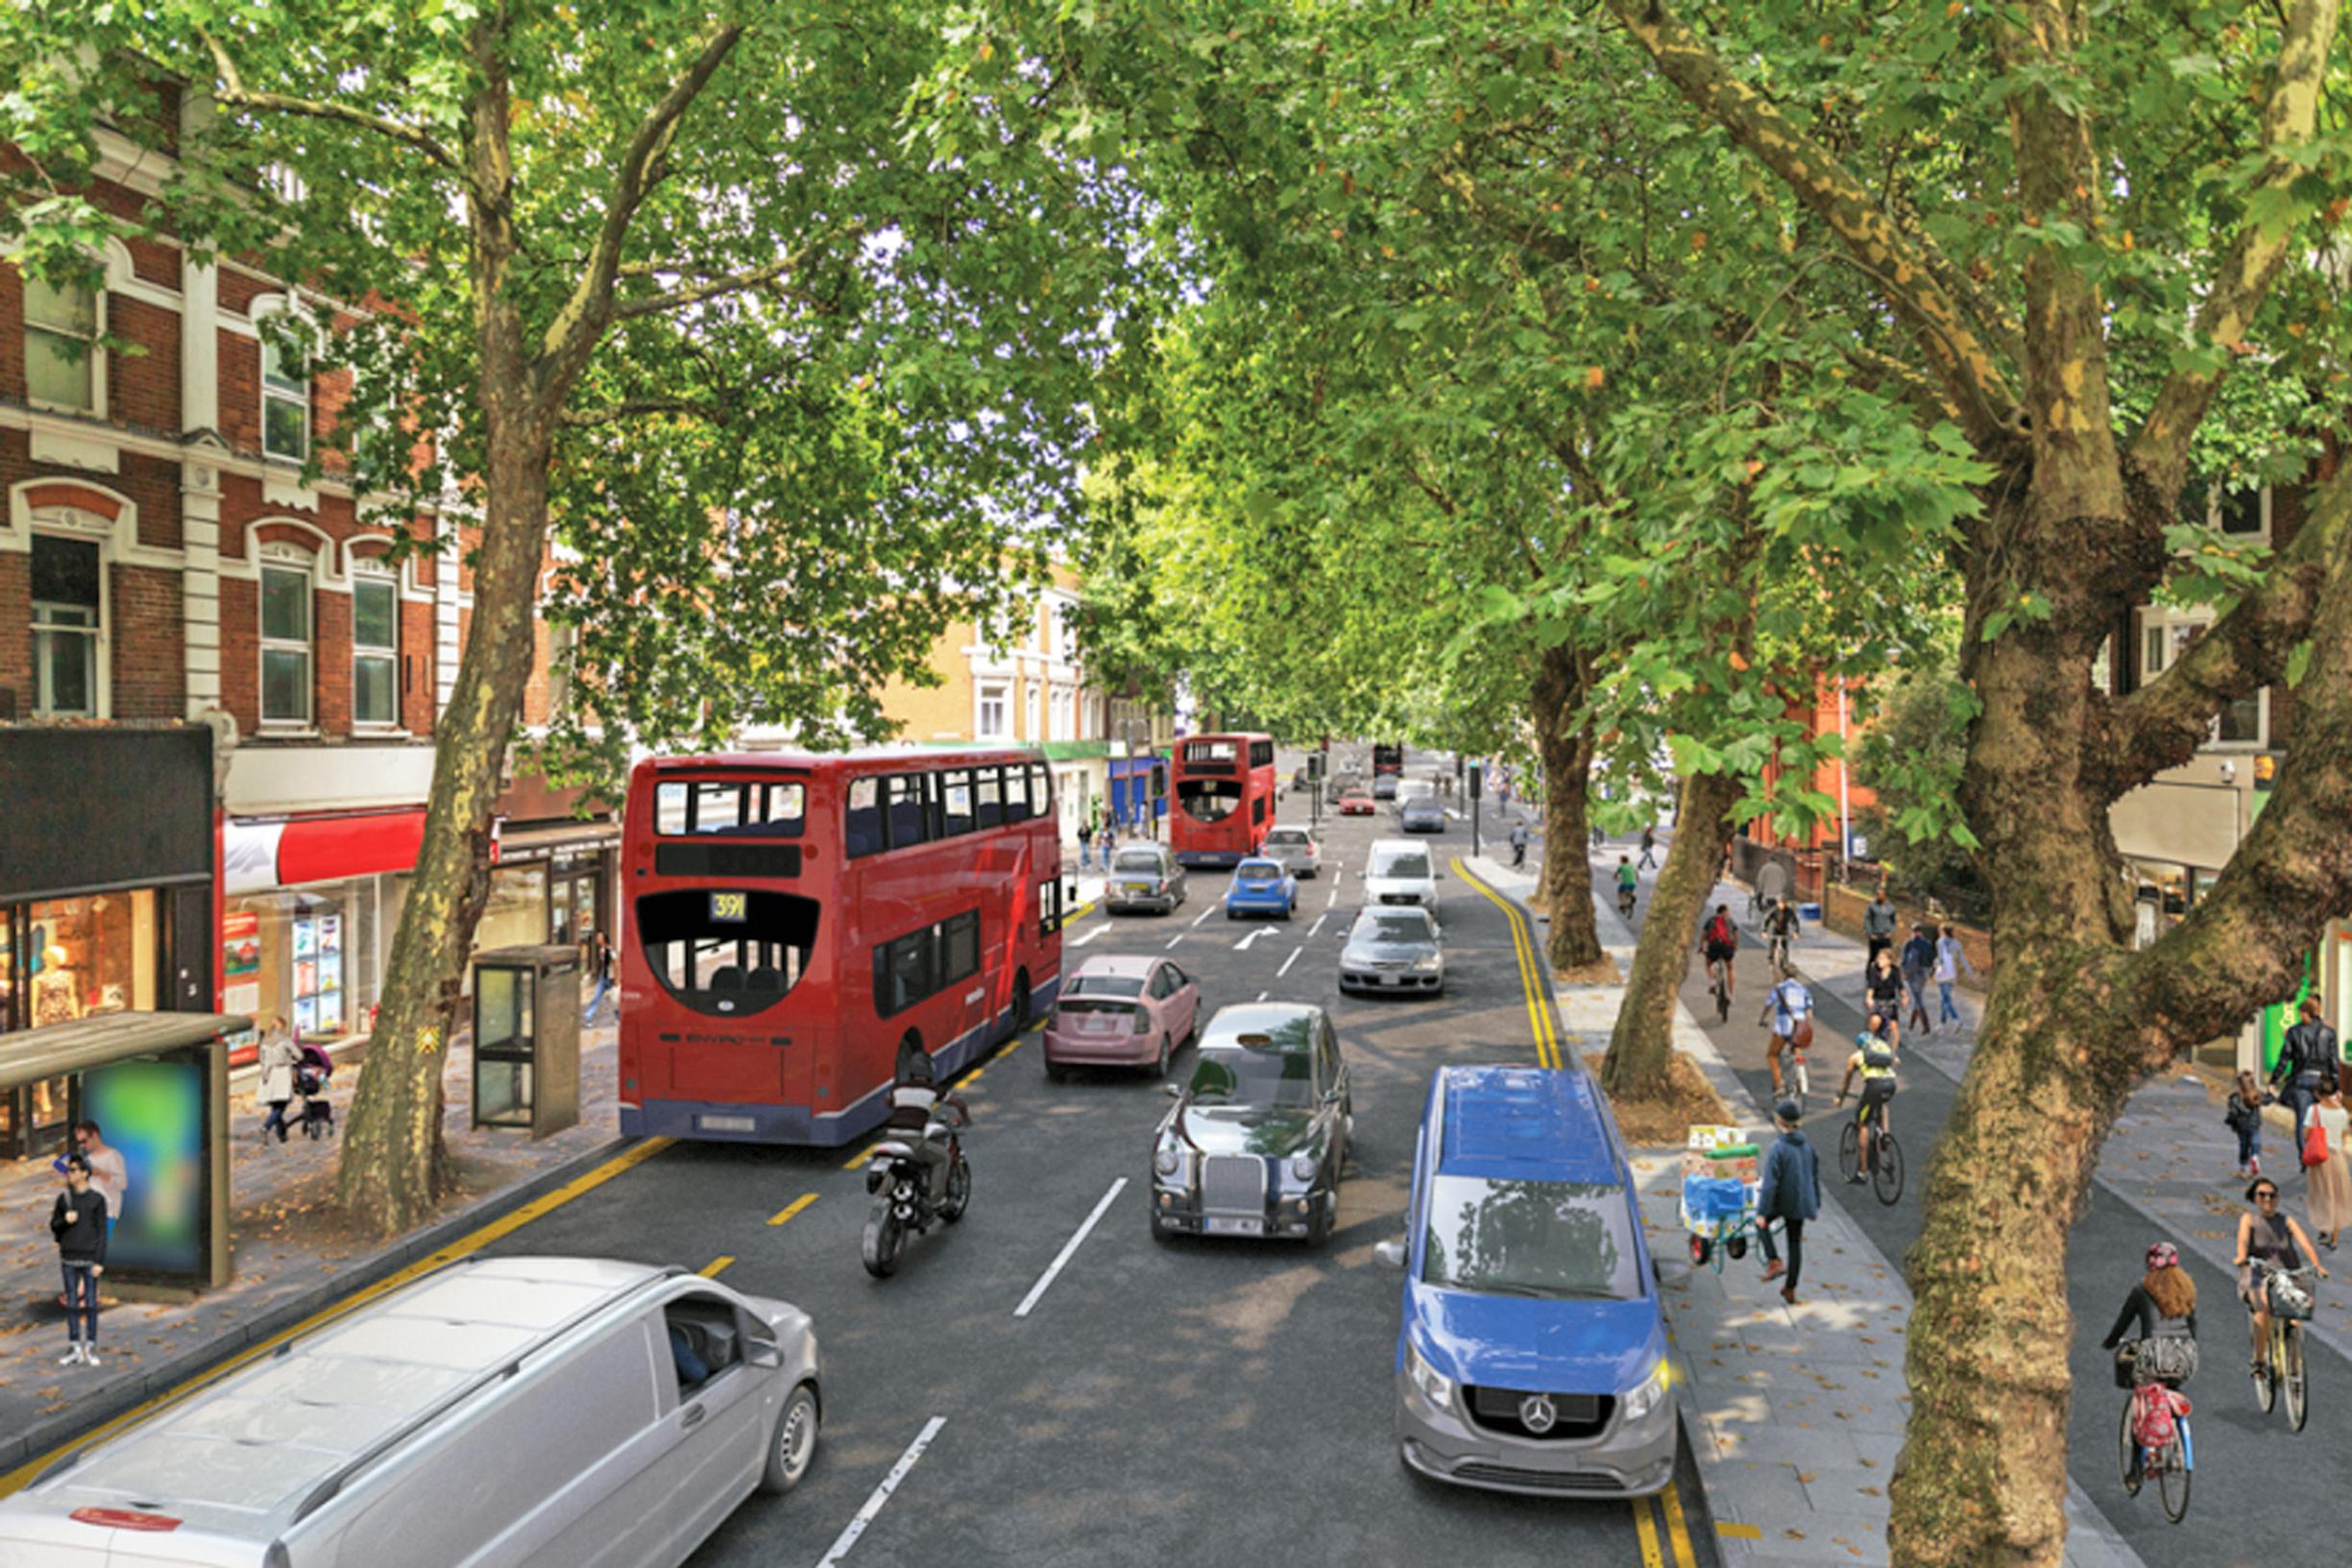 How Chiswick High Road will look with the proposed two-way cycle track on the south side